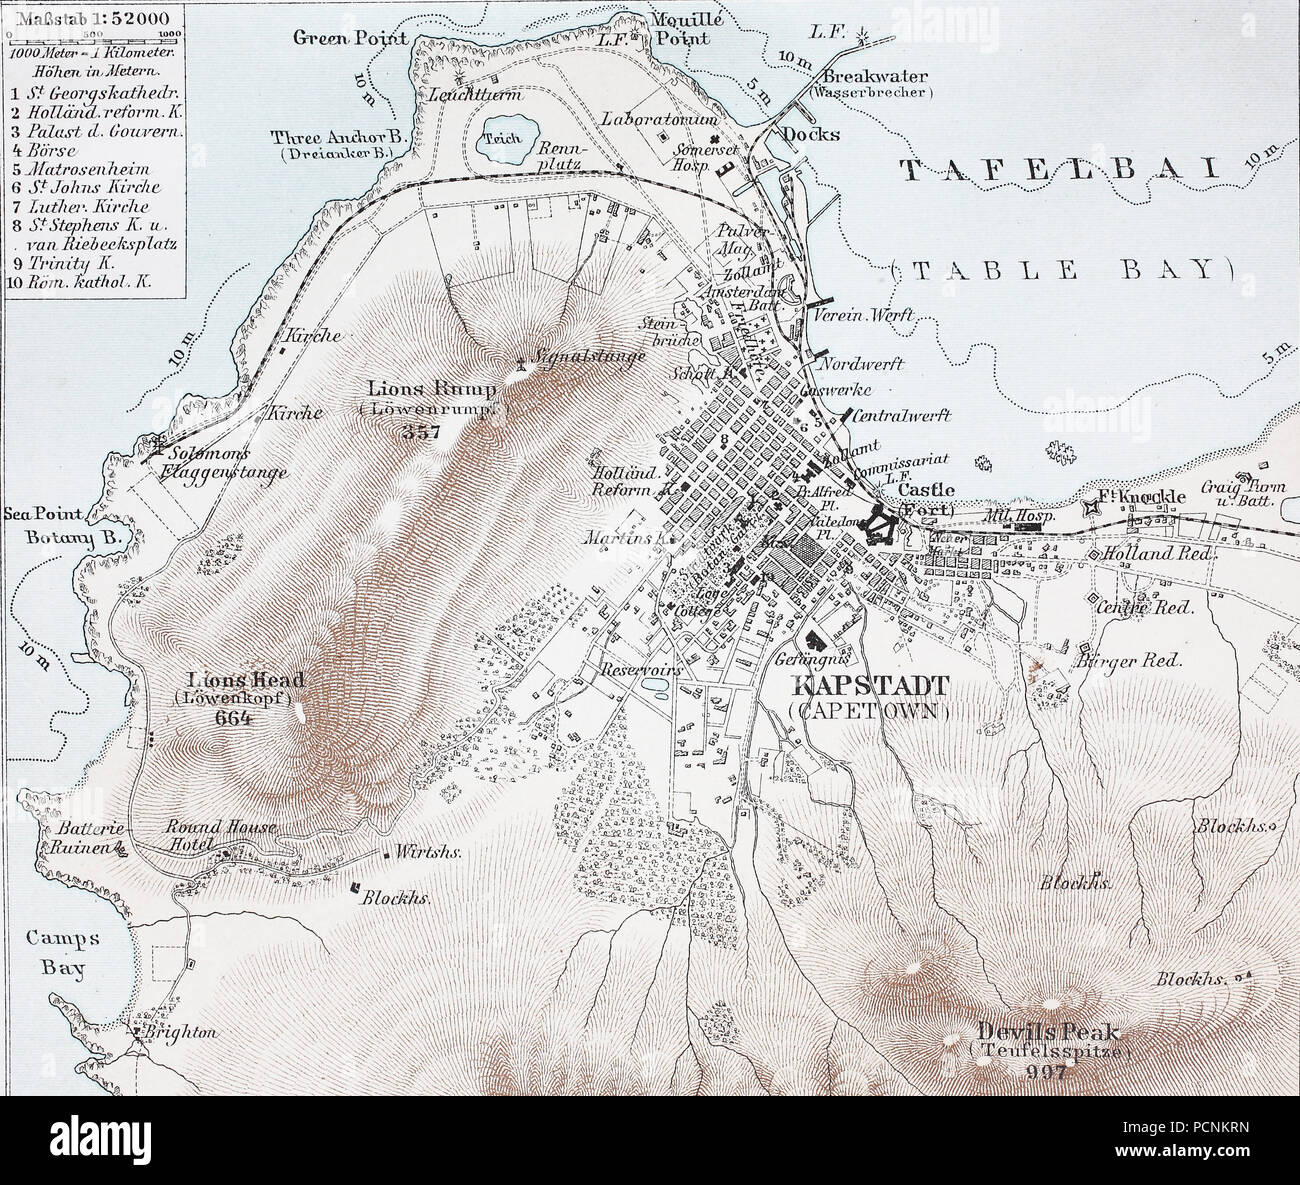 historical map of Capetown, South Africa, digital improved reproduction of an historical image from the year 1885 Stock Photo